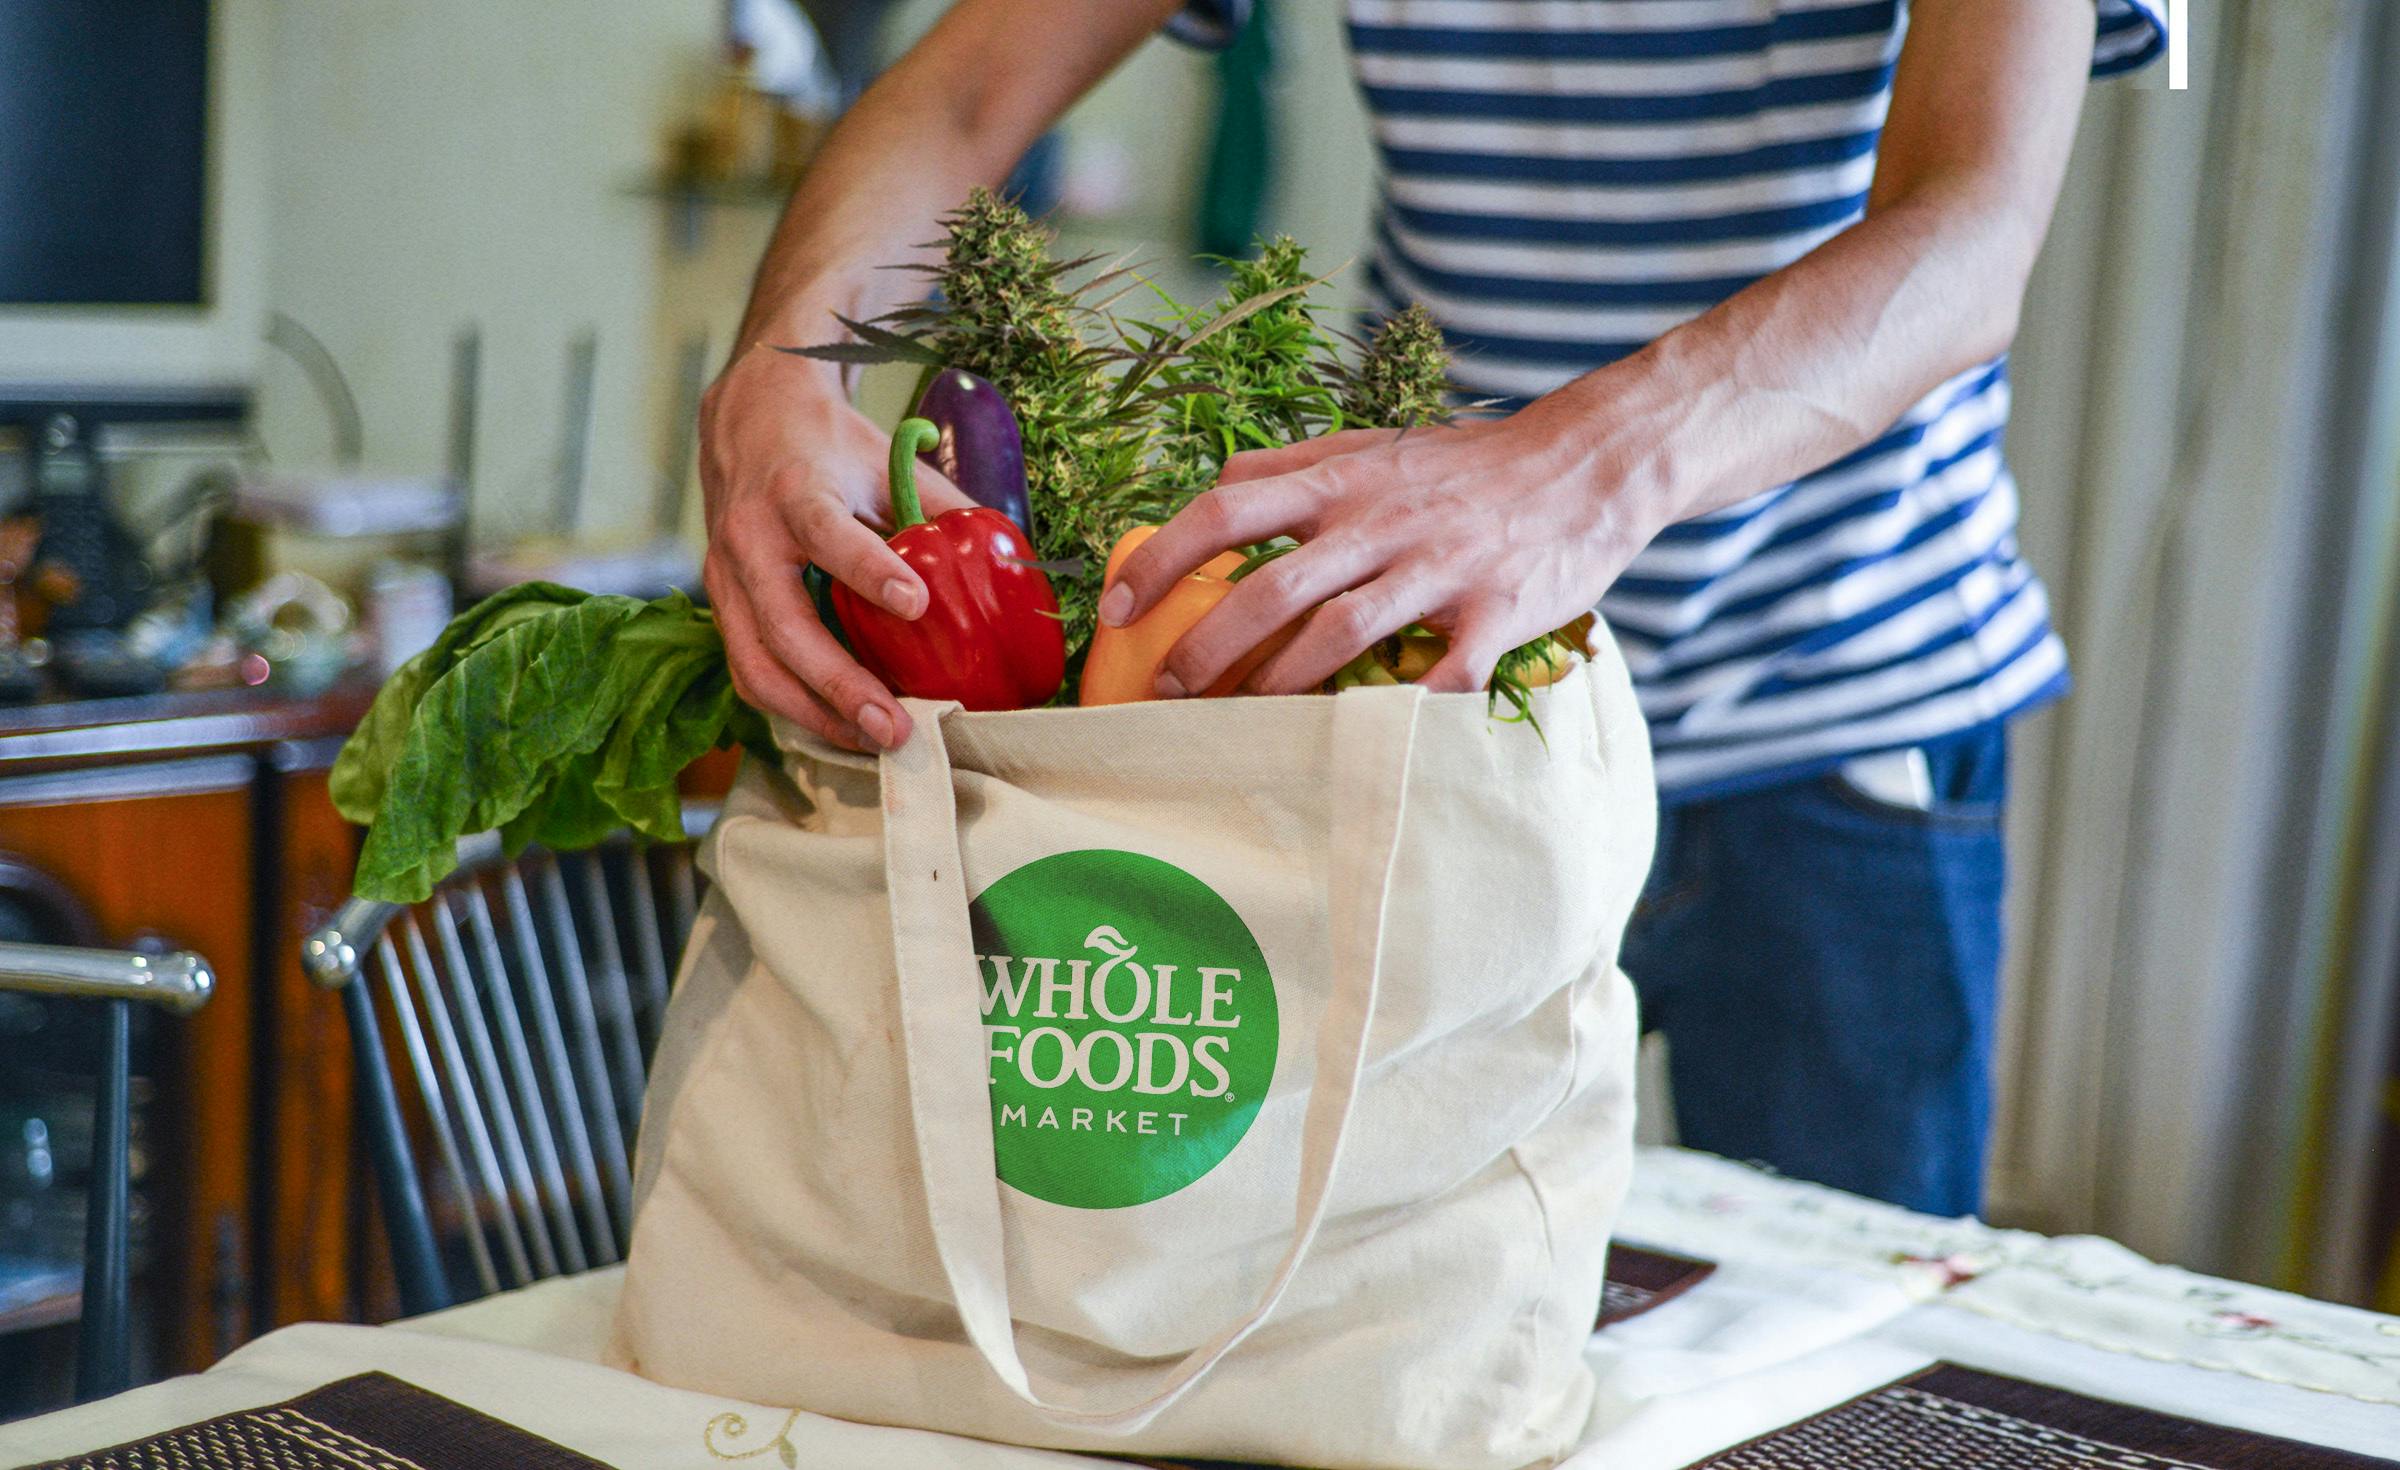 shopper packs Whole Foods grocery bag with produce and cannabis plants